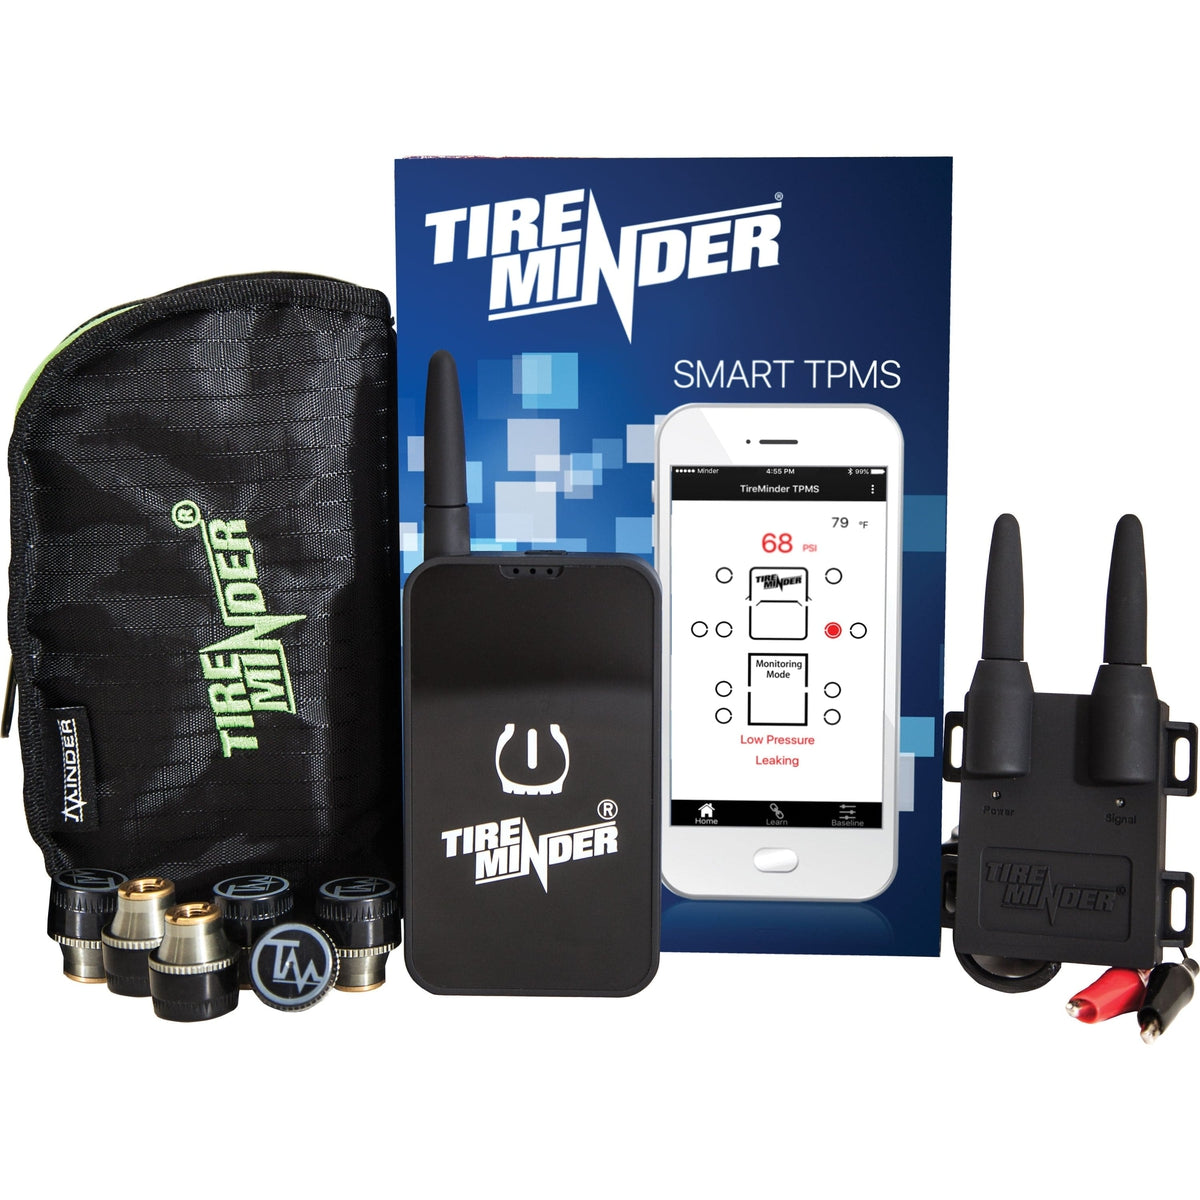 Minder Research Qualifies for Free Shipping Minder First Smart TPMS for RV Blue #TM22132